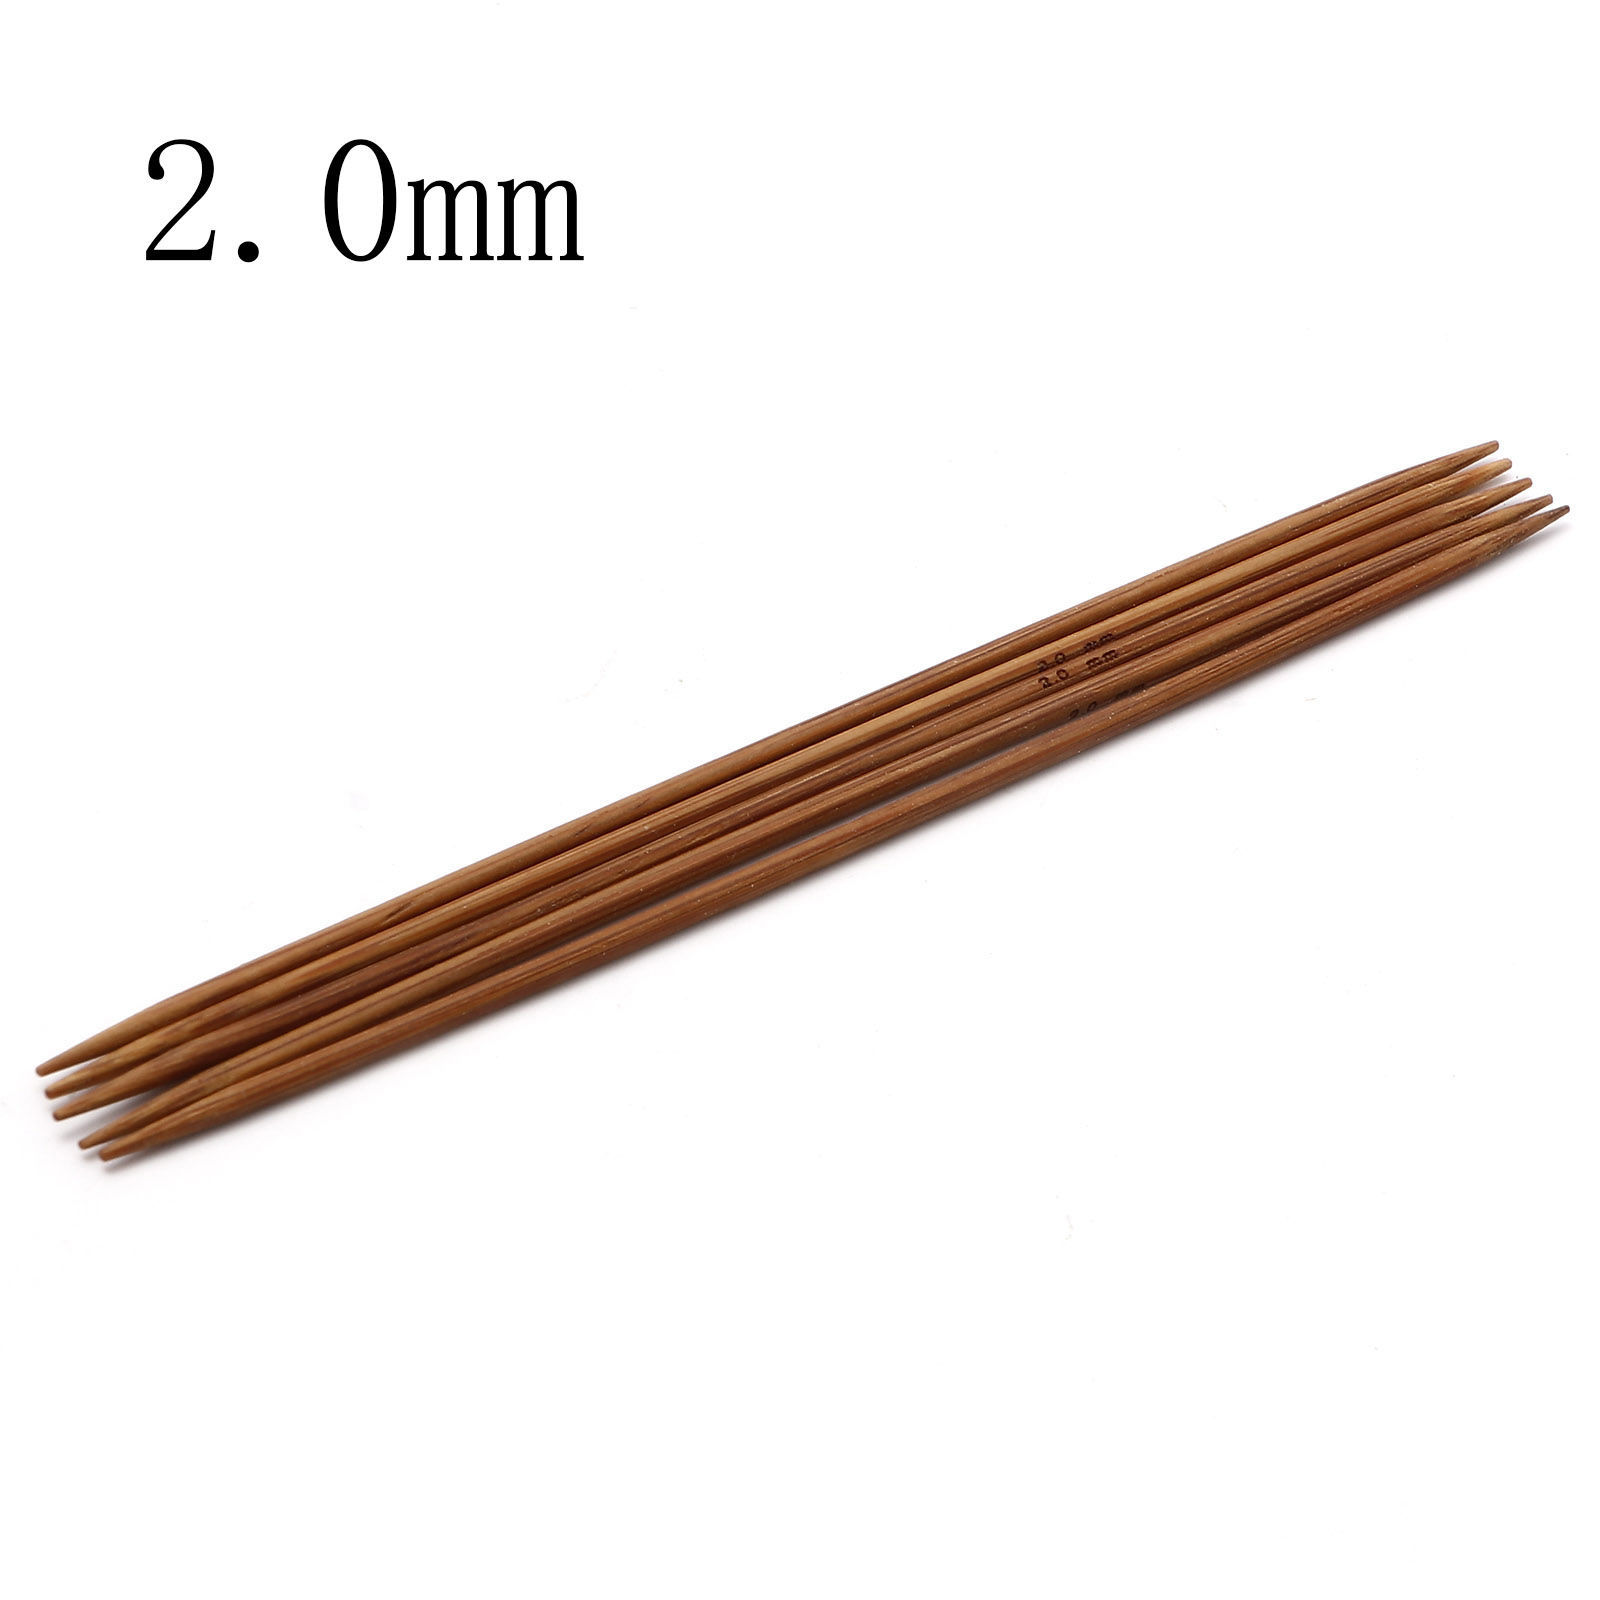 Picture of (US0 2.0mm) Bamboo Double Pointed Knitting Needles Brown 13cm(5 1/8") long, 5 PCs